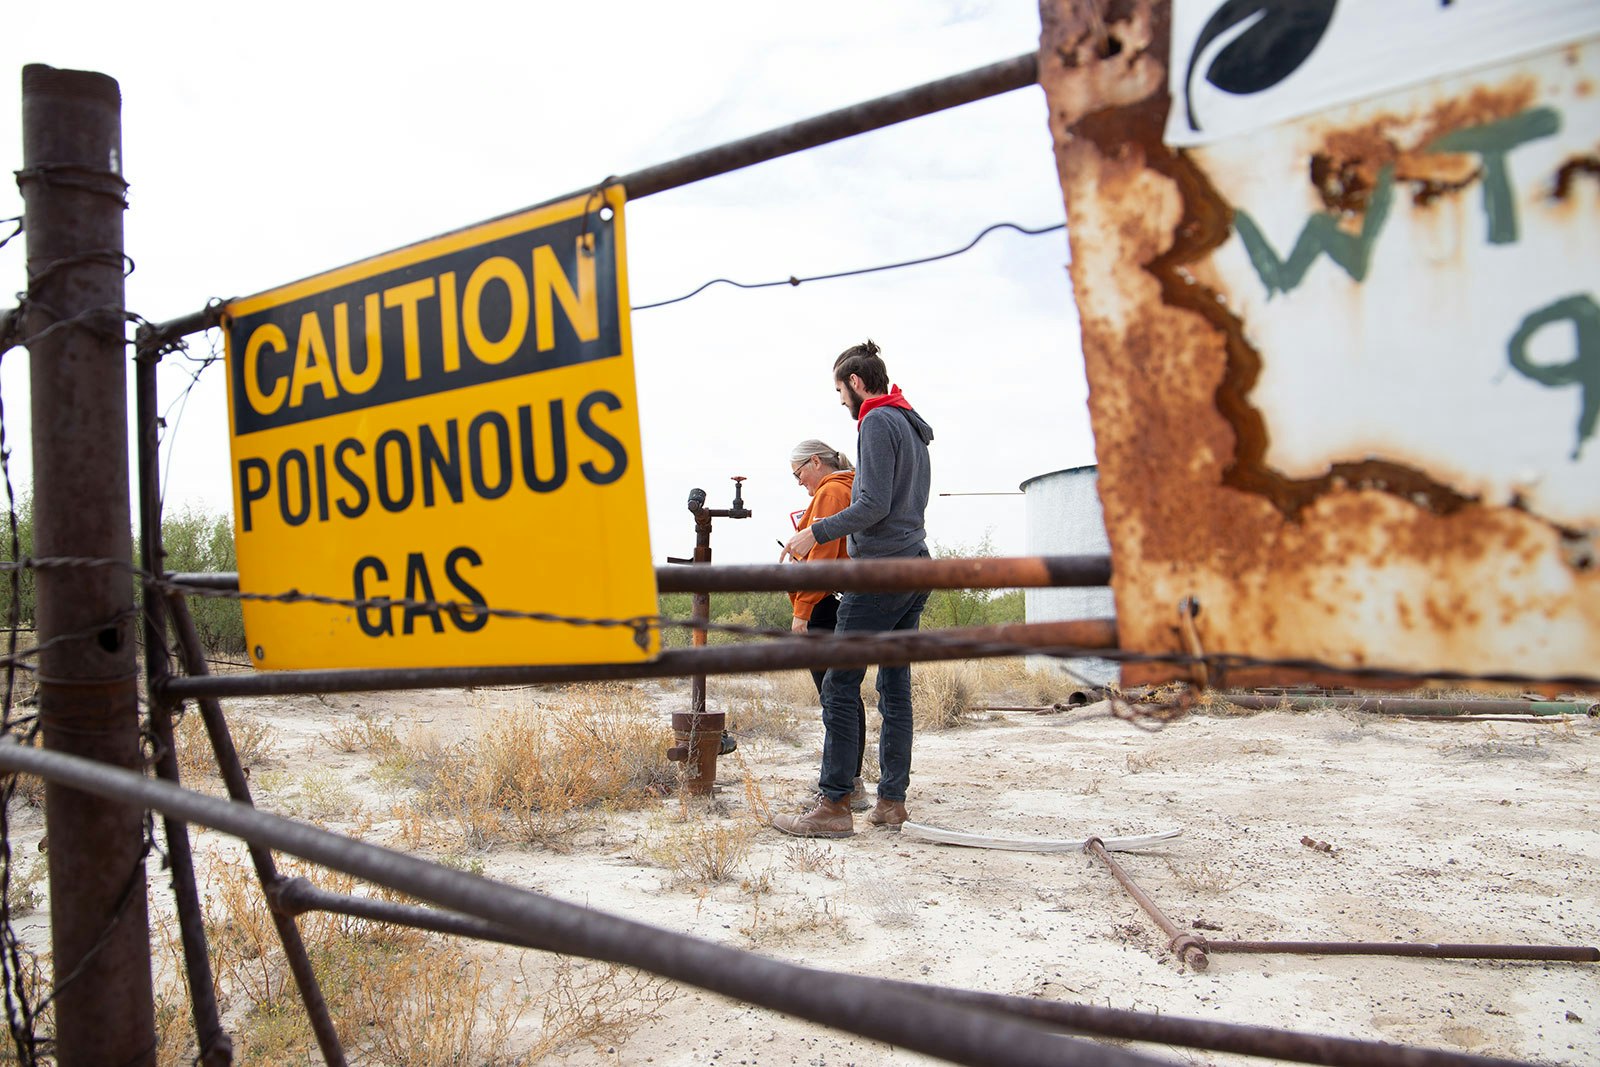 people standing behind a fence that has a sign that says "caution, poisonous gas"